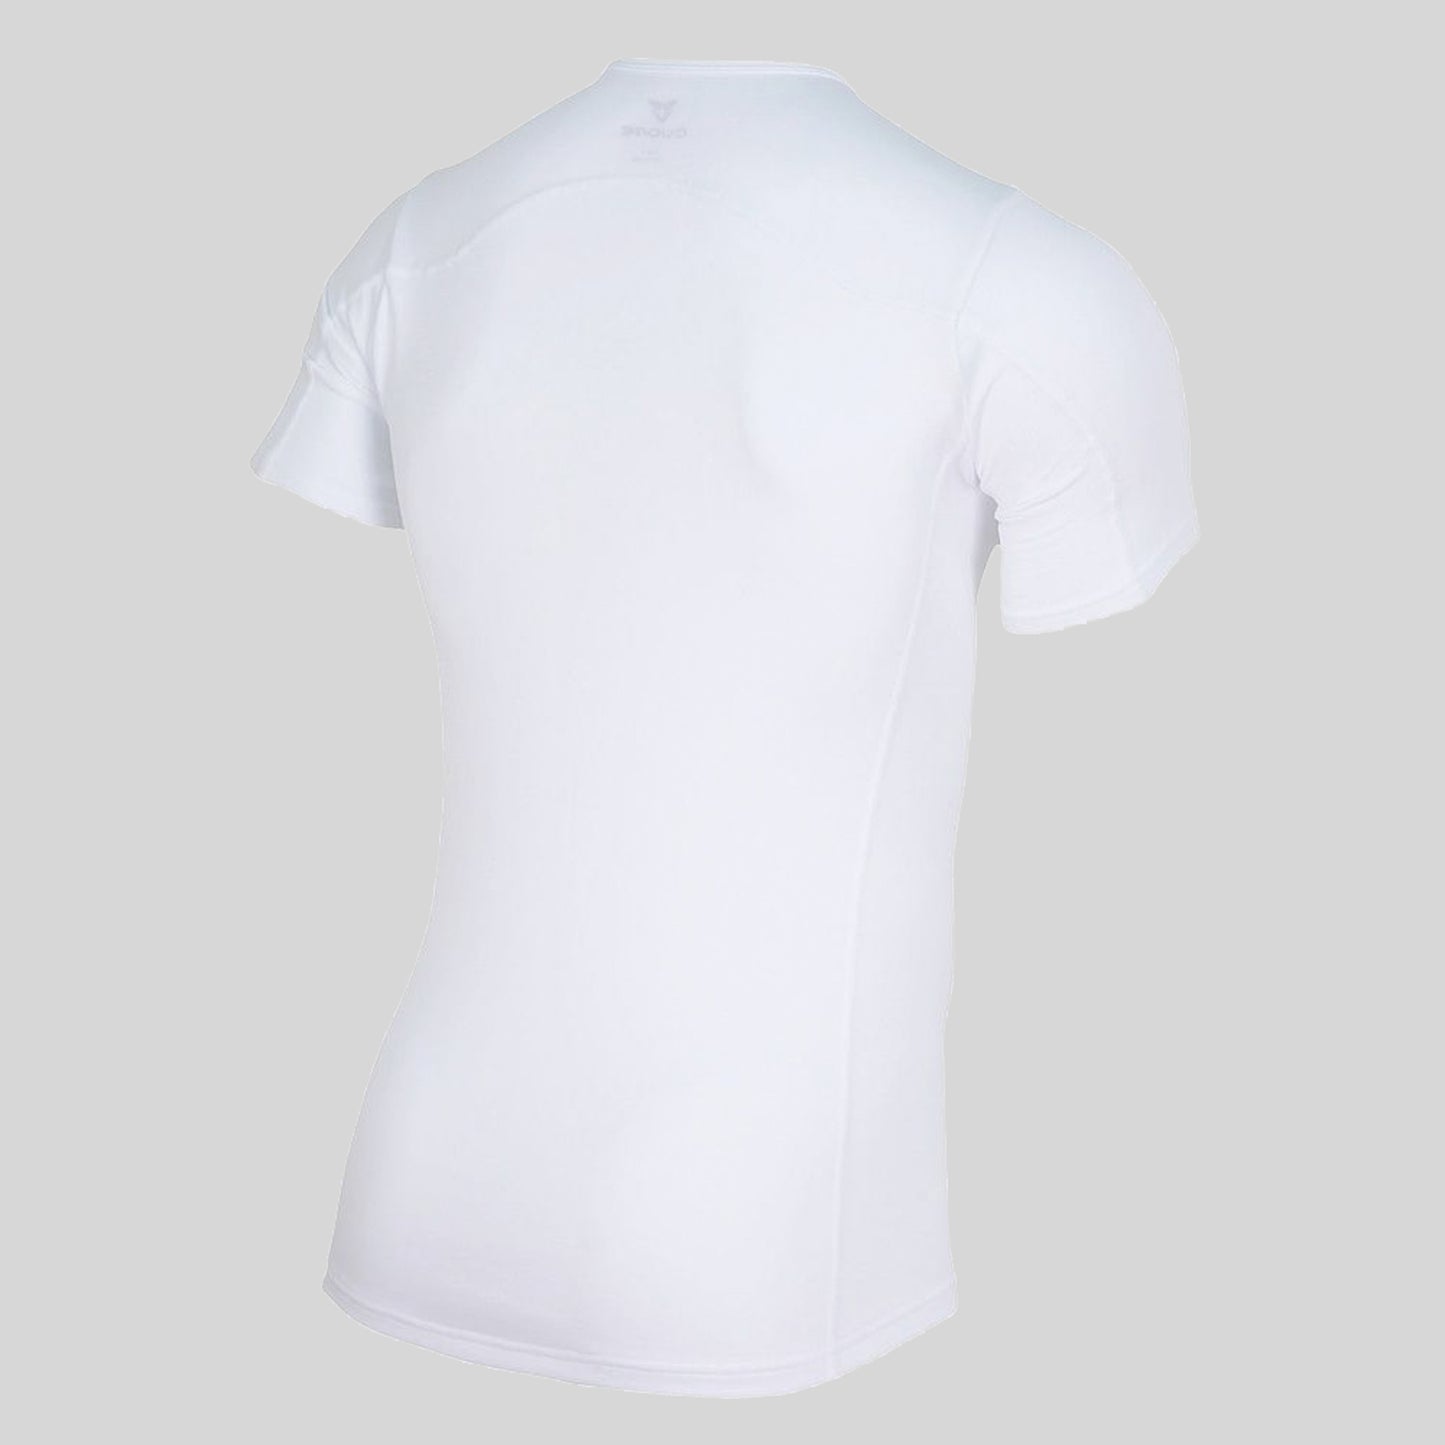 Short Sleeve Baselayer White by Cuore of Switzerland for Ascender Cycling Club Zürich Switzerland Back View